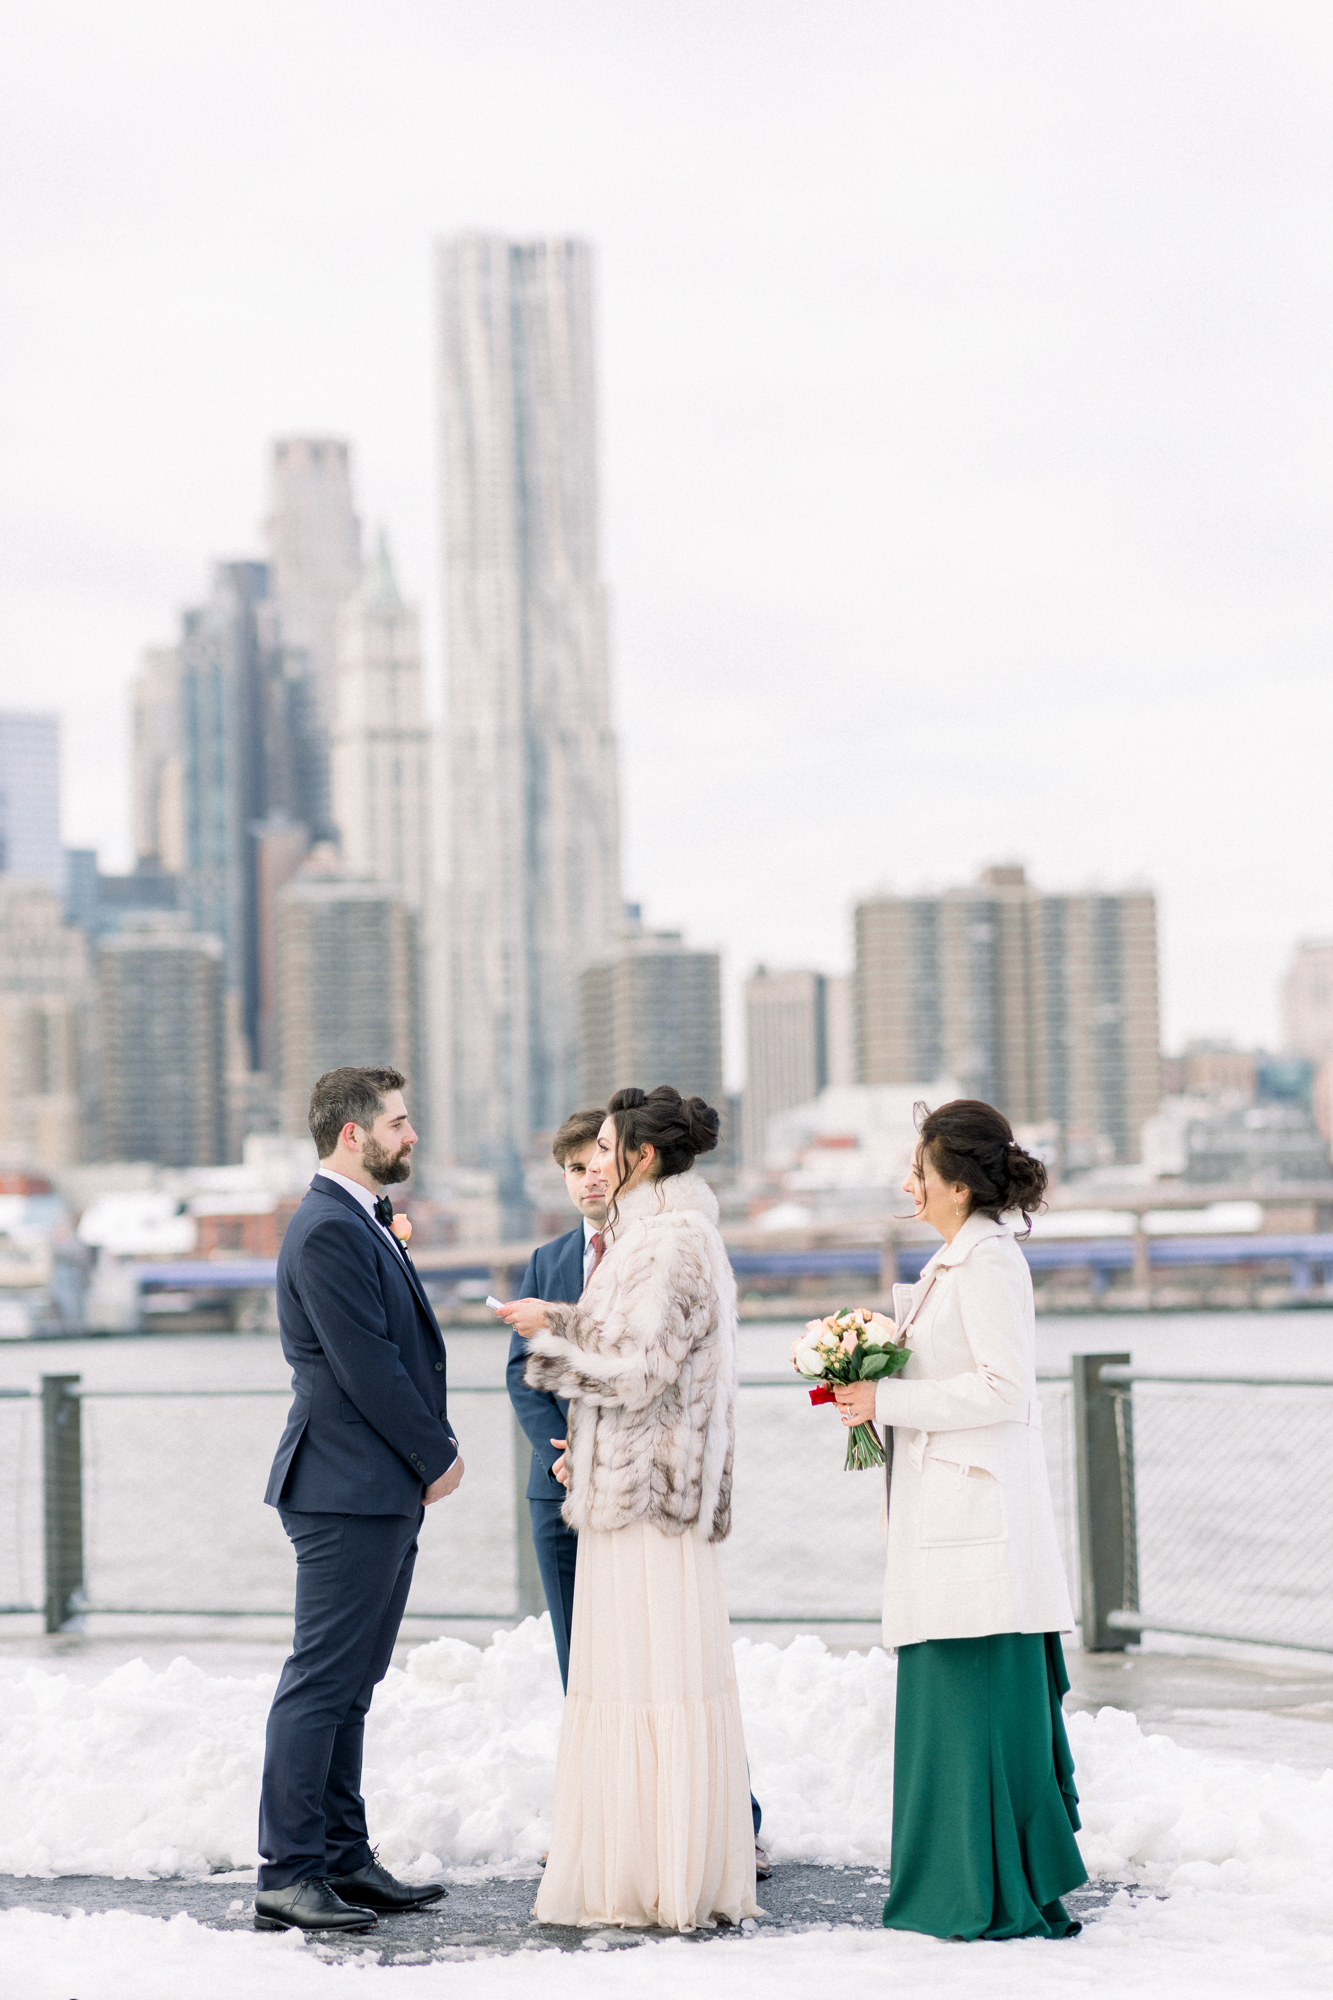 Timeless NYC Event Venues for Winter Weddings